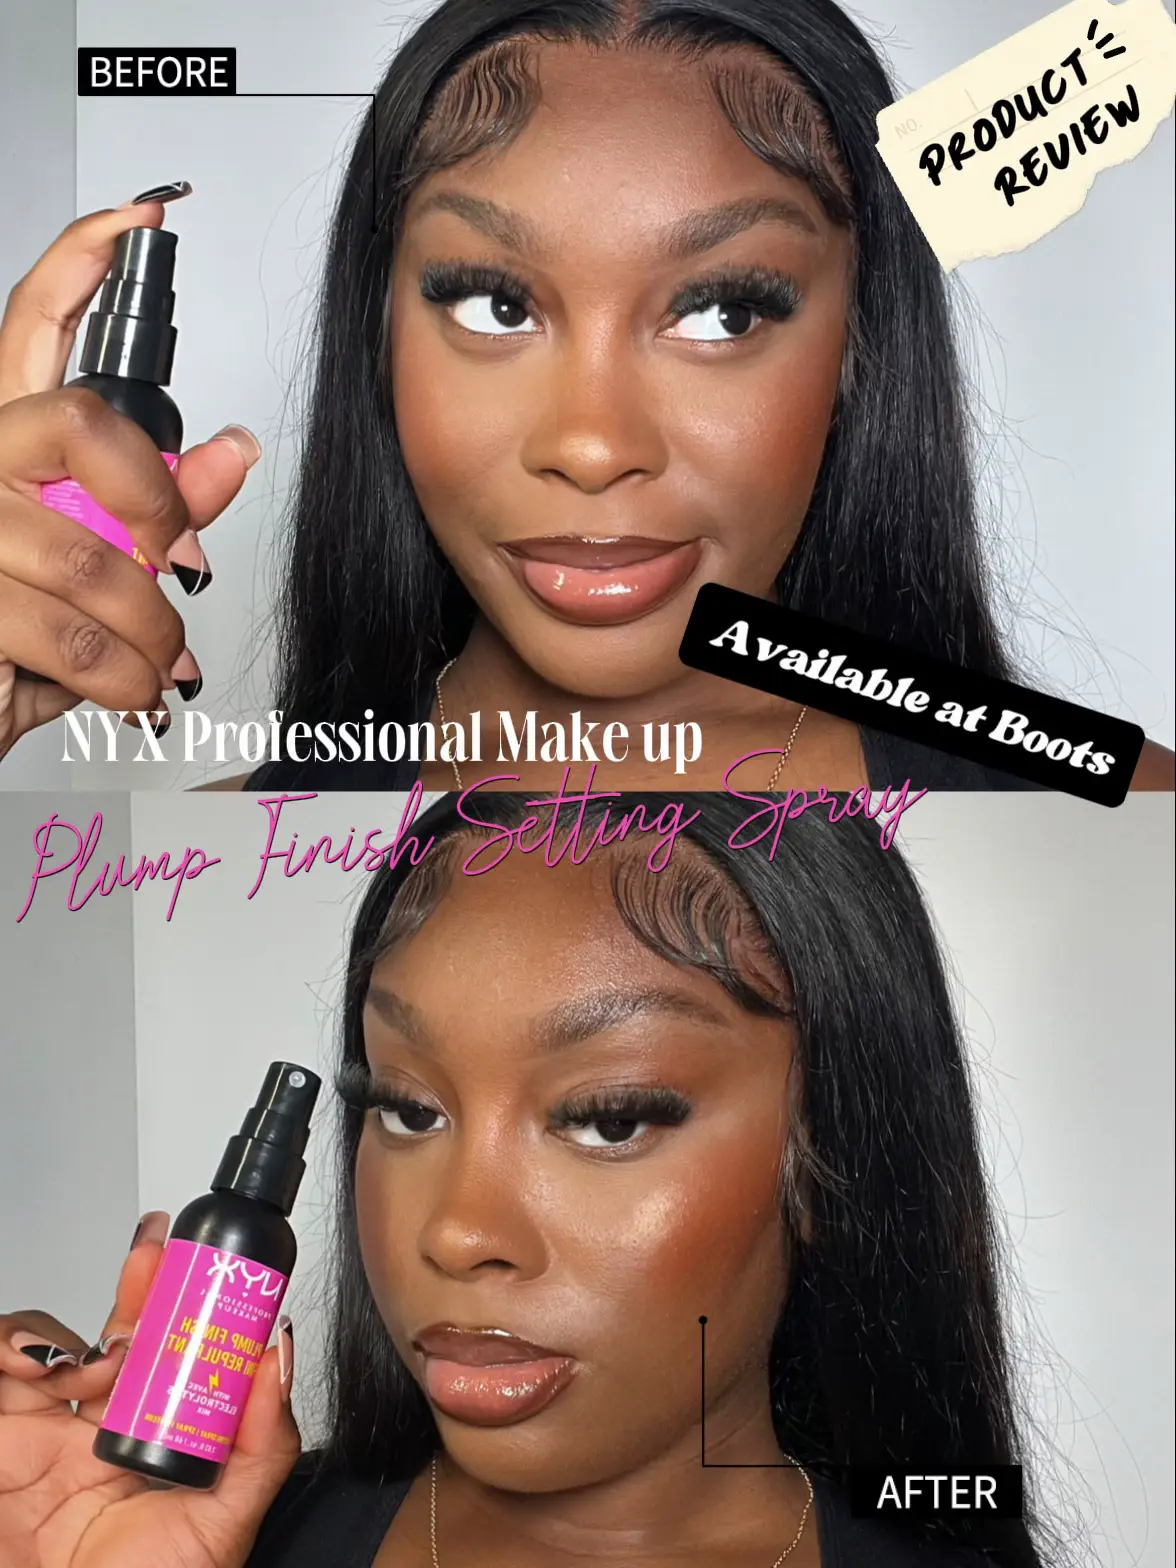 NYX Professional Plump Finish Setting by | Lemon8 Spray Gallery Sharnteparkes | posted